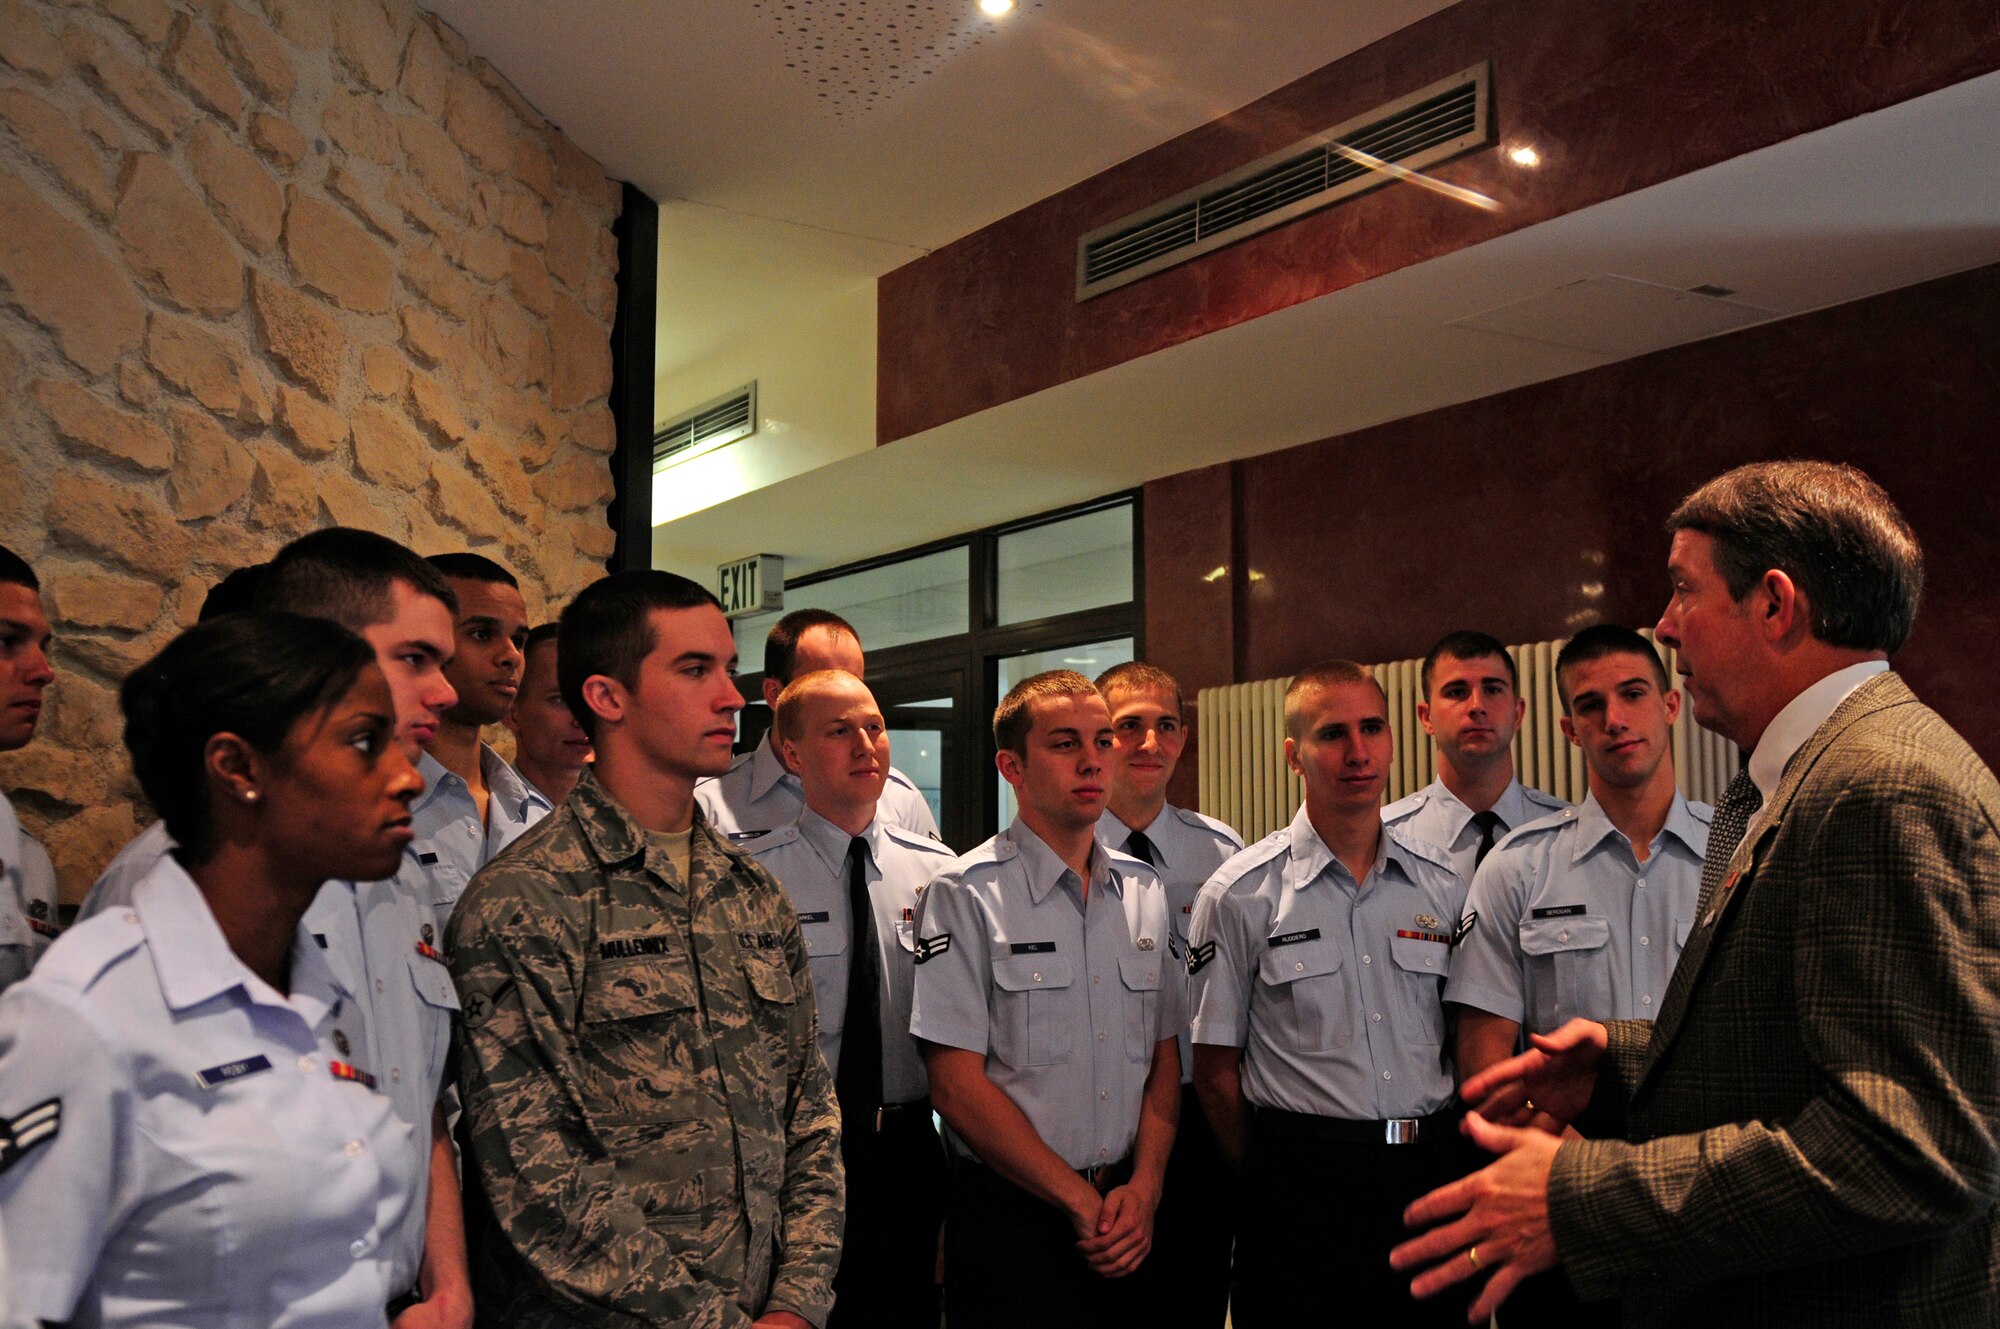 Fifteenth Chief Master Sgt. of the Air Force Rodney McKinley talks to Airmen on Ramstein Air Base, Germany, July 26, 2010. The purpose of Chief McKinley's visit was to meet Airmen in Germany. (U.S. Air Force photo by Airman 1st Class Brea Miller)